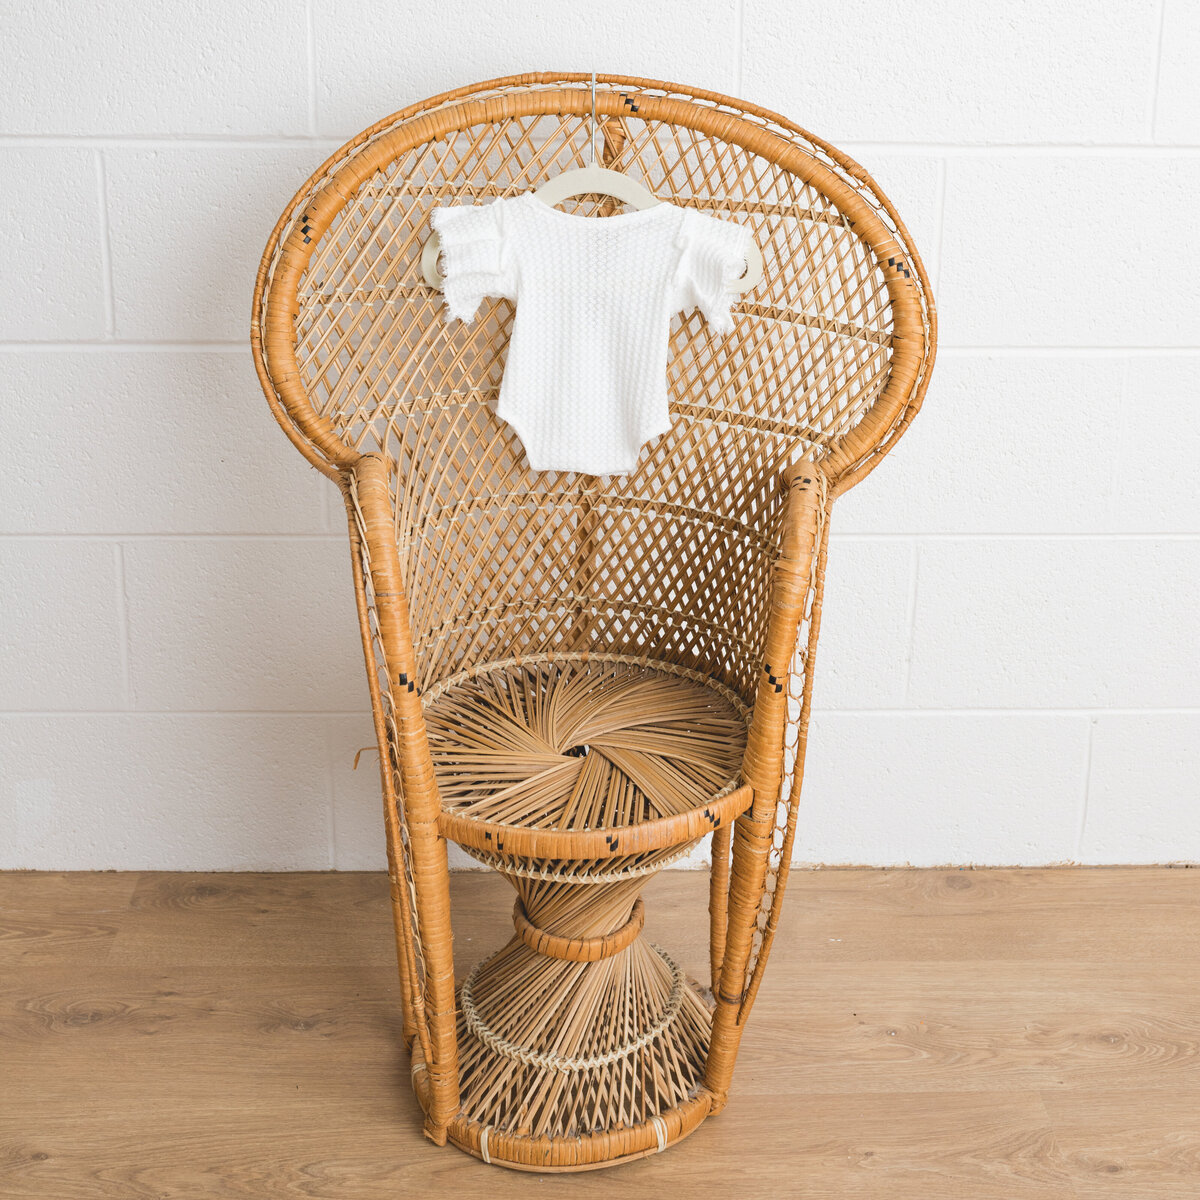 Image depicts a miniature peacock chair in a photography studio on the chair hangs a tiny newborn outfit in white knit  with l a lace bodice.  This image is a sample of Lauren Vanier Photography's newborn client wardrobe. Image taken in Hobart Tasmania